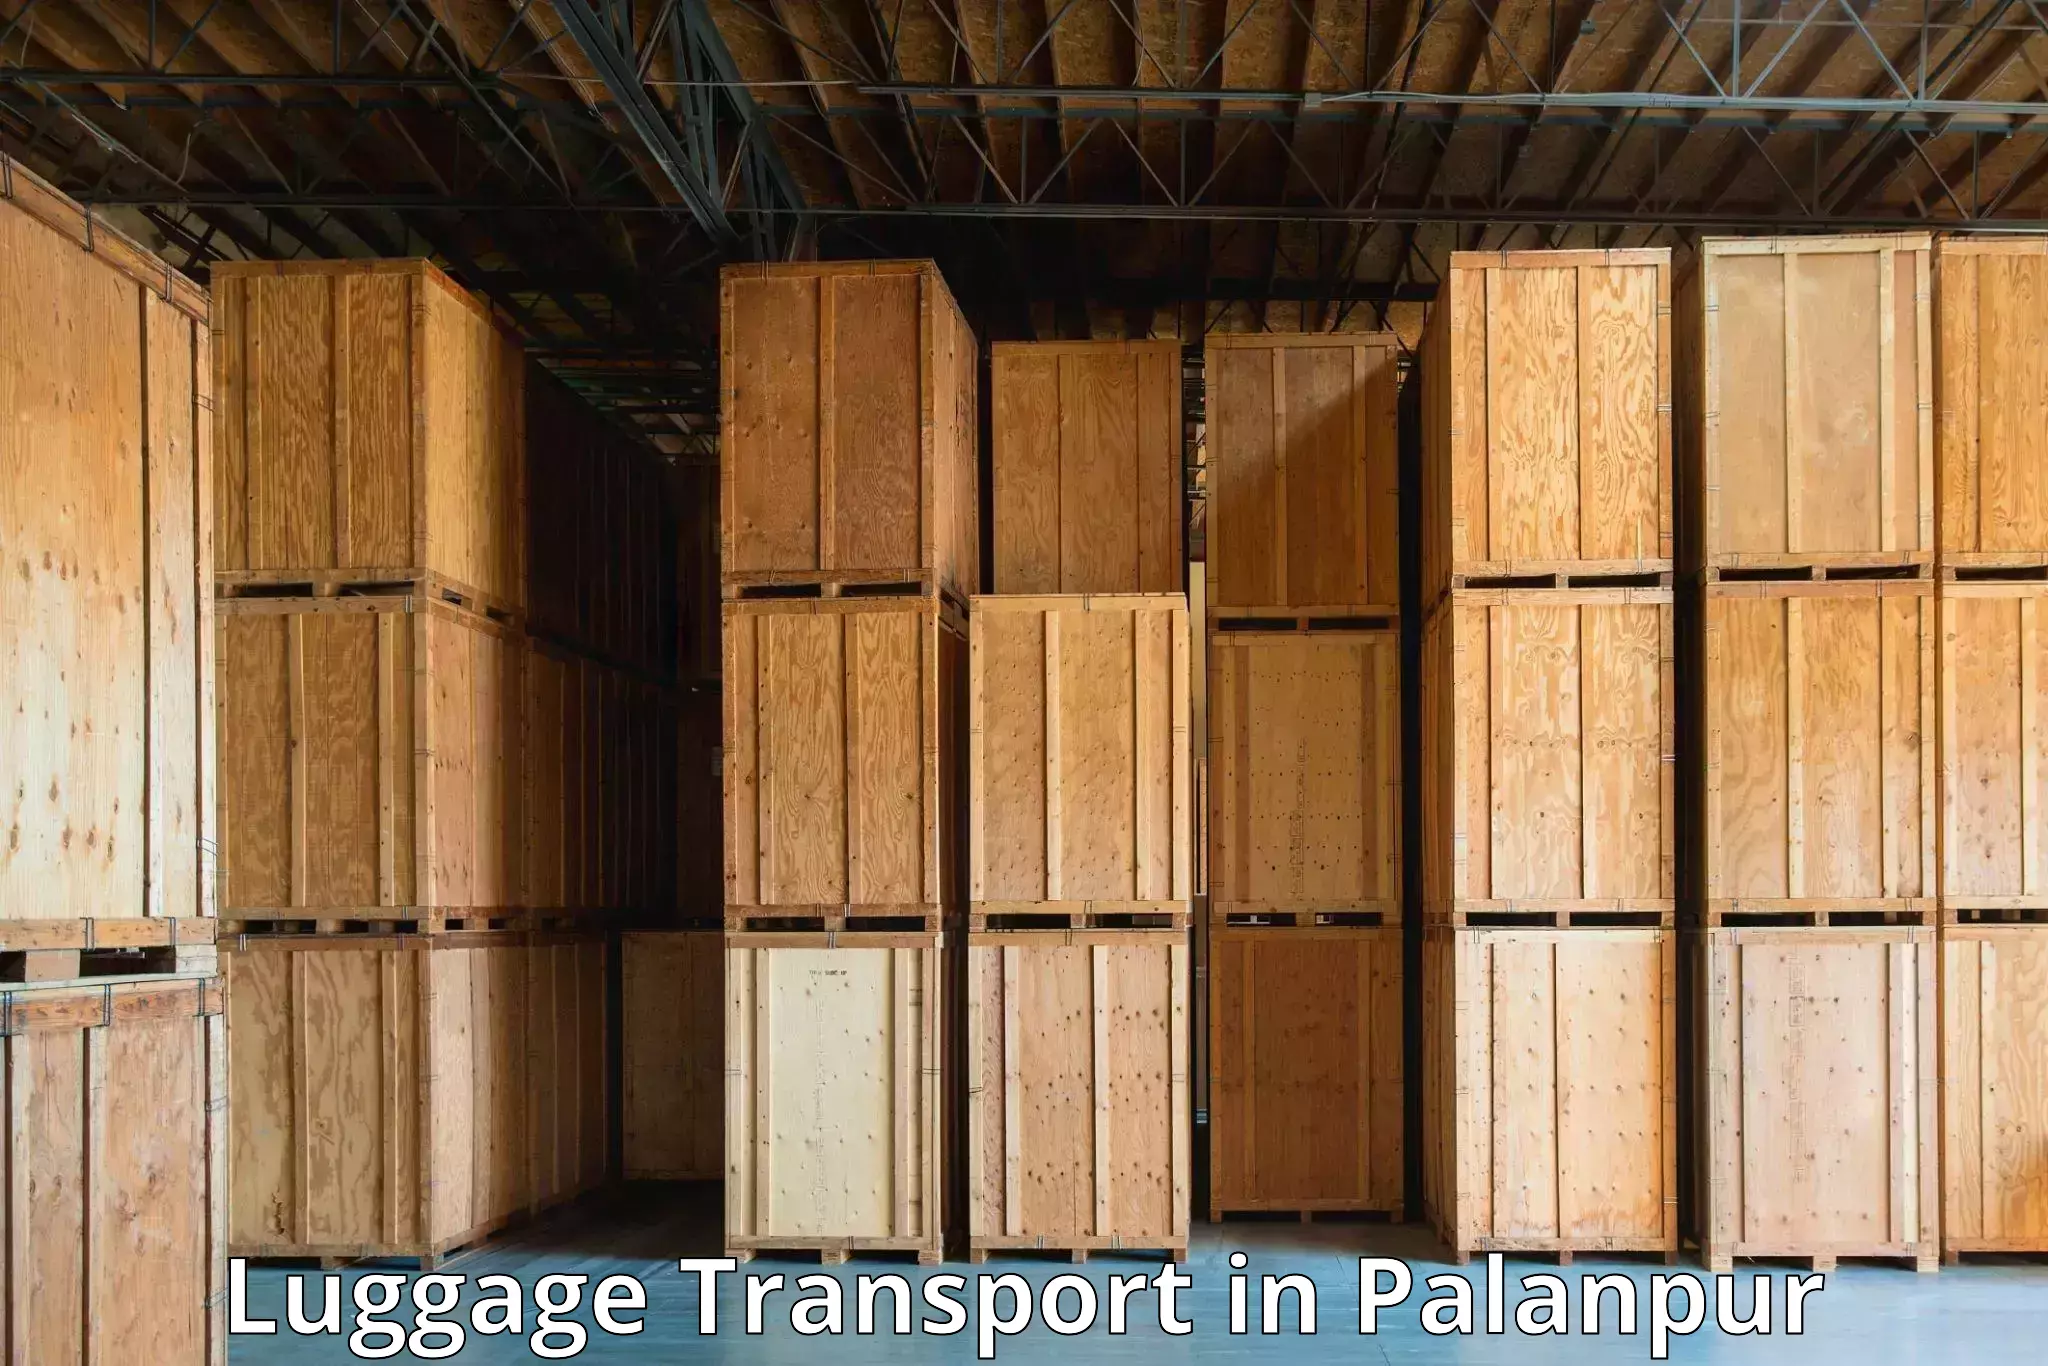 Domestic luggage transport in Palanpur